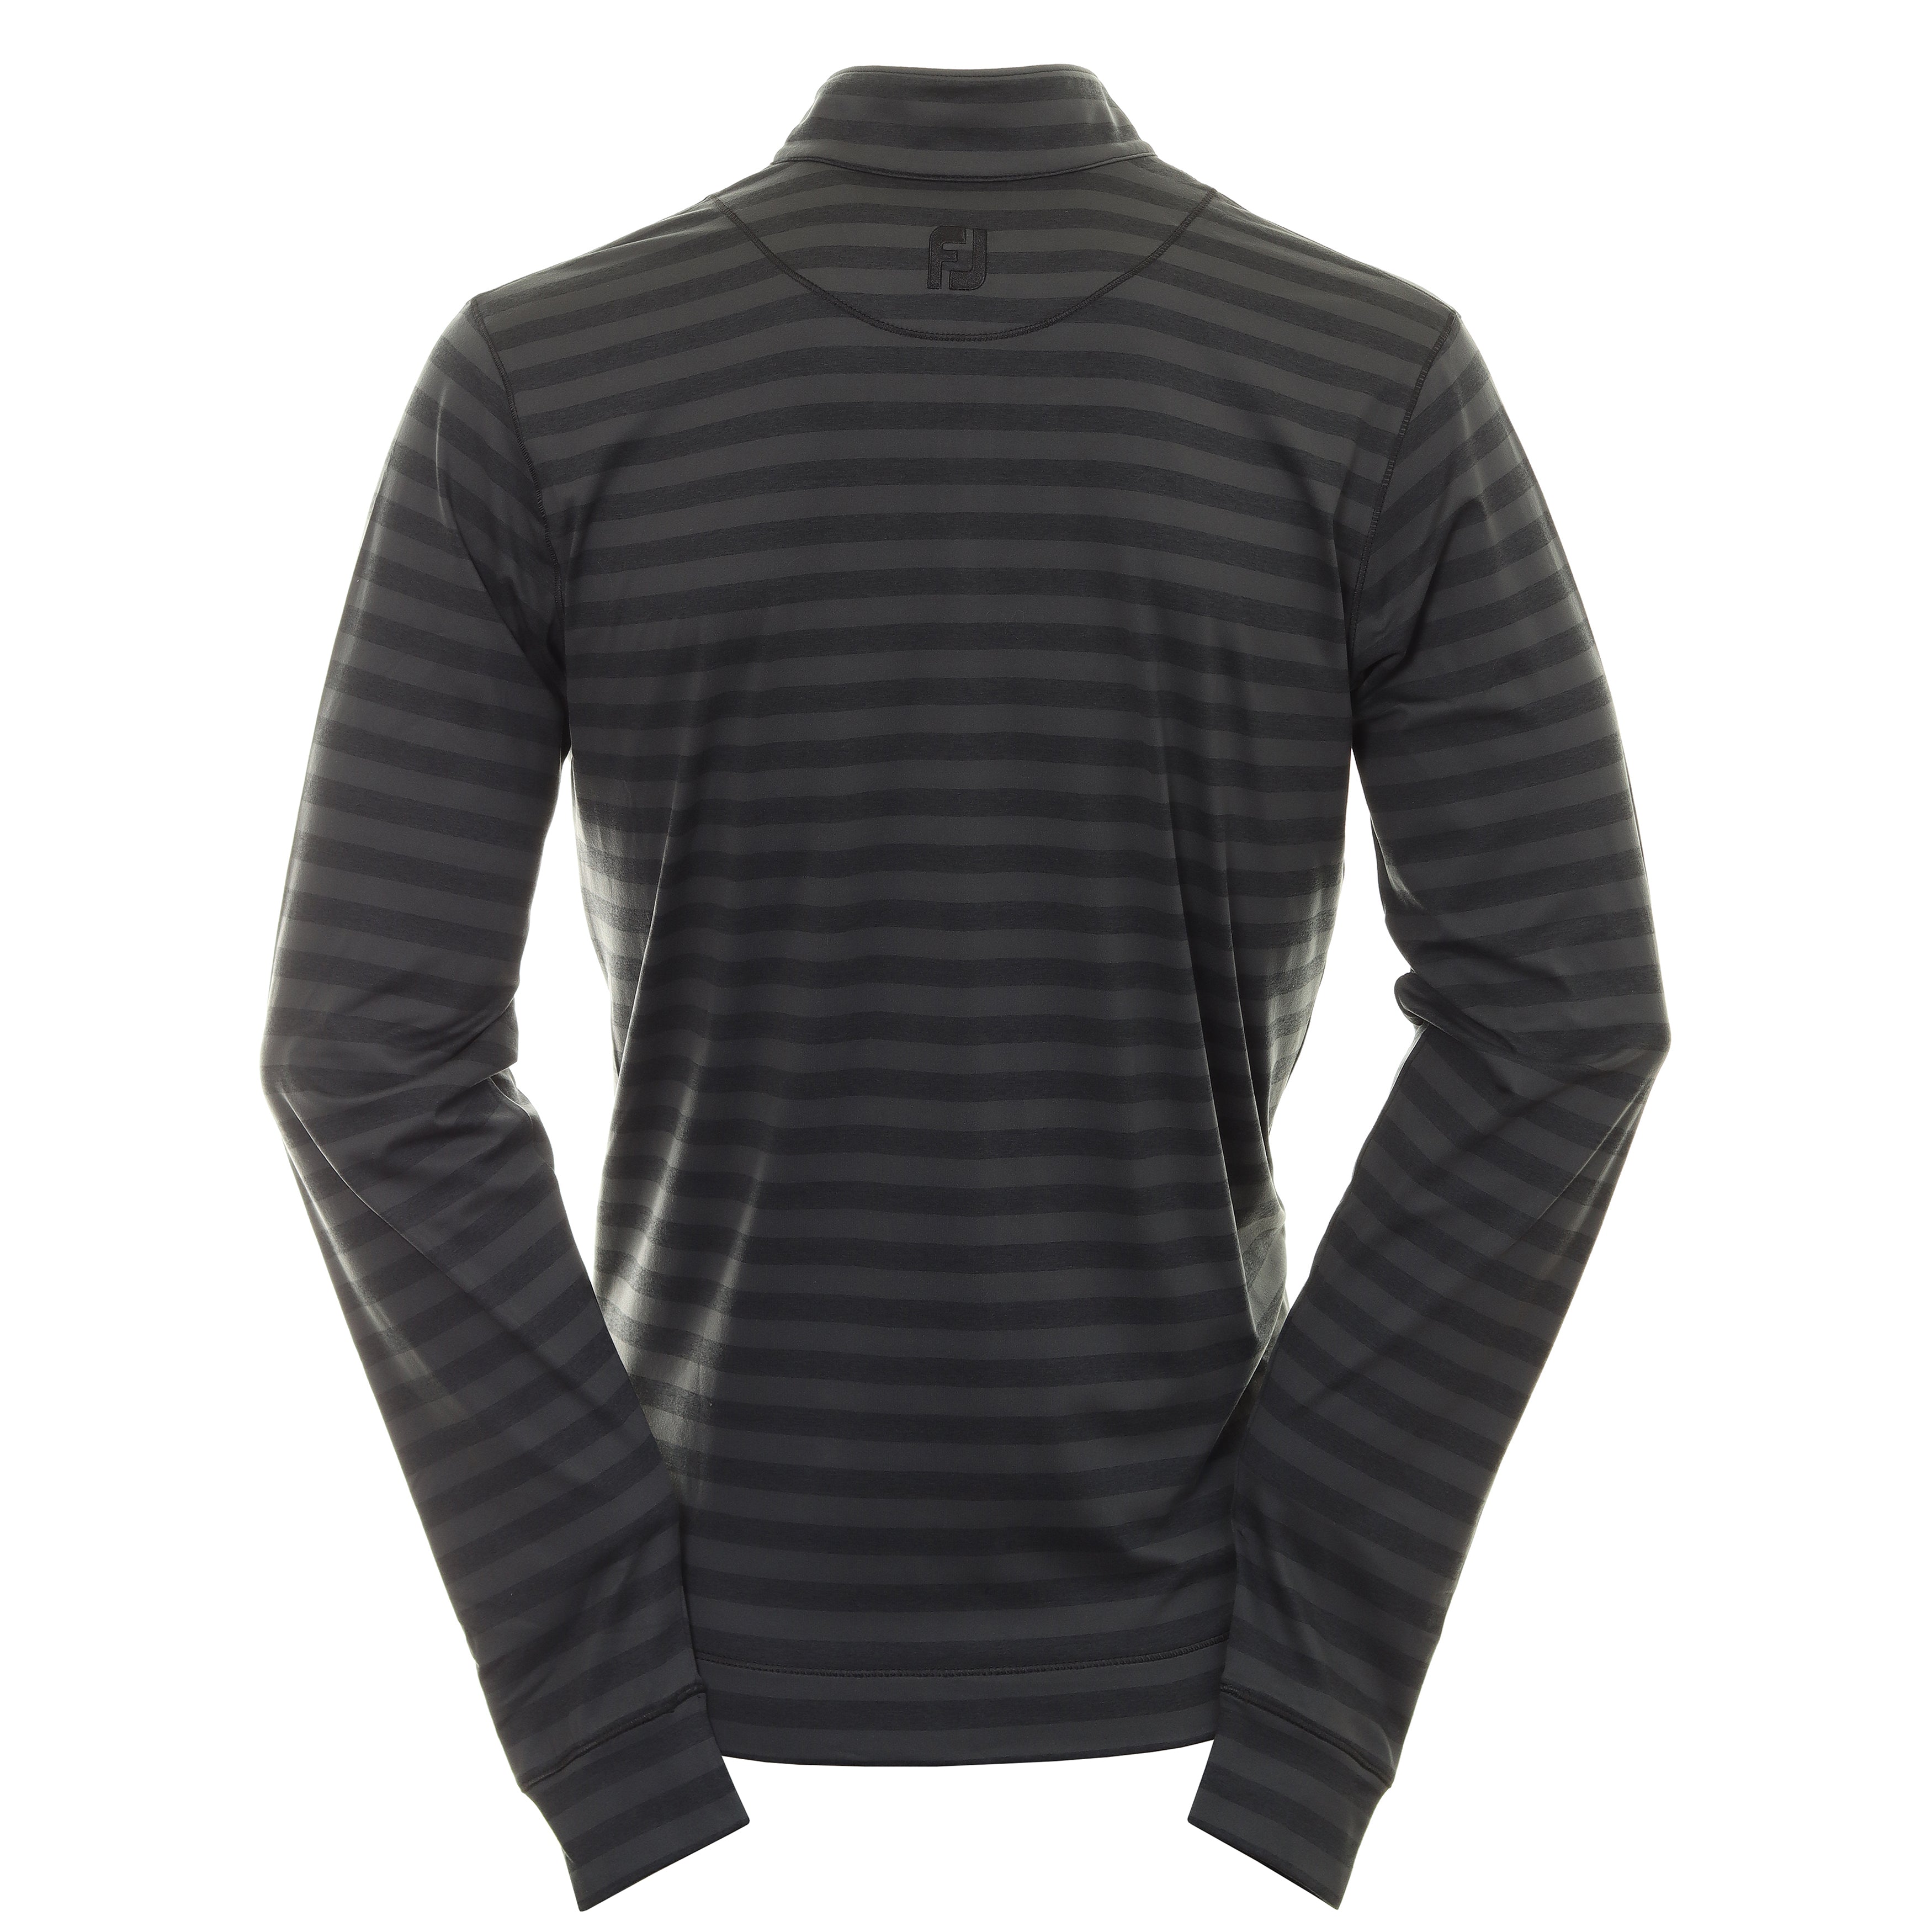 FootJoy Peach Tonal Stripe Chill Out Pullover 88445 Black | Function18